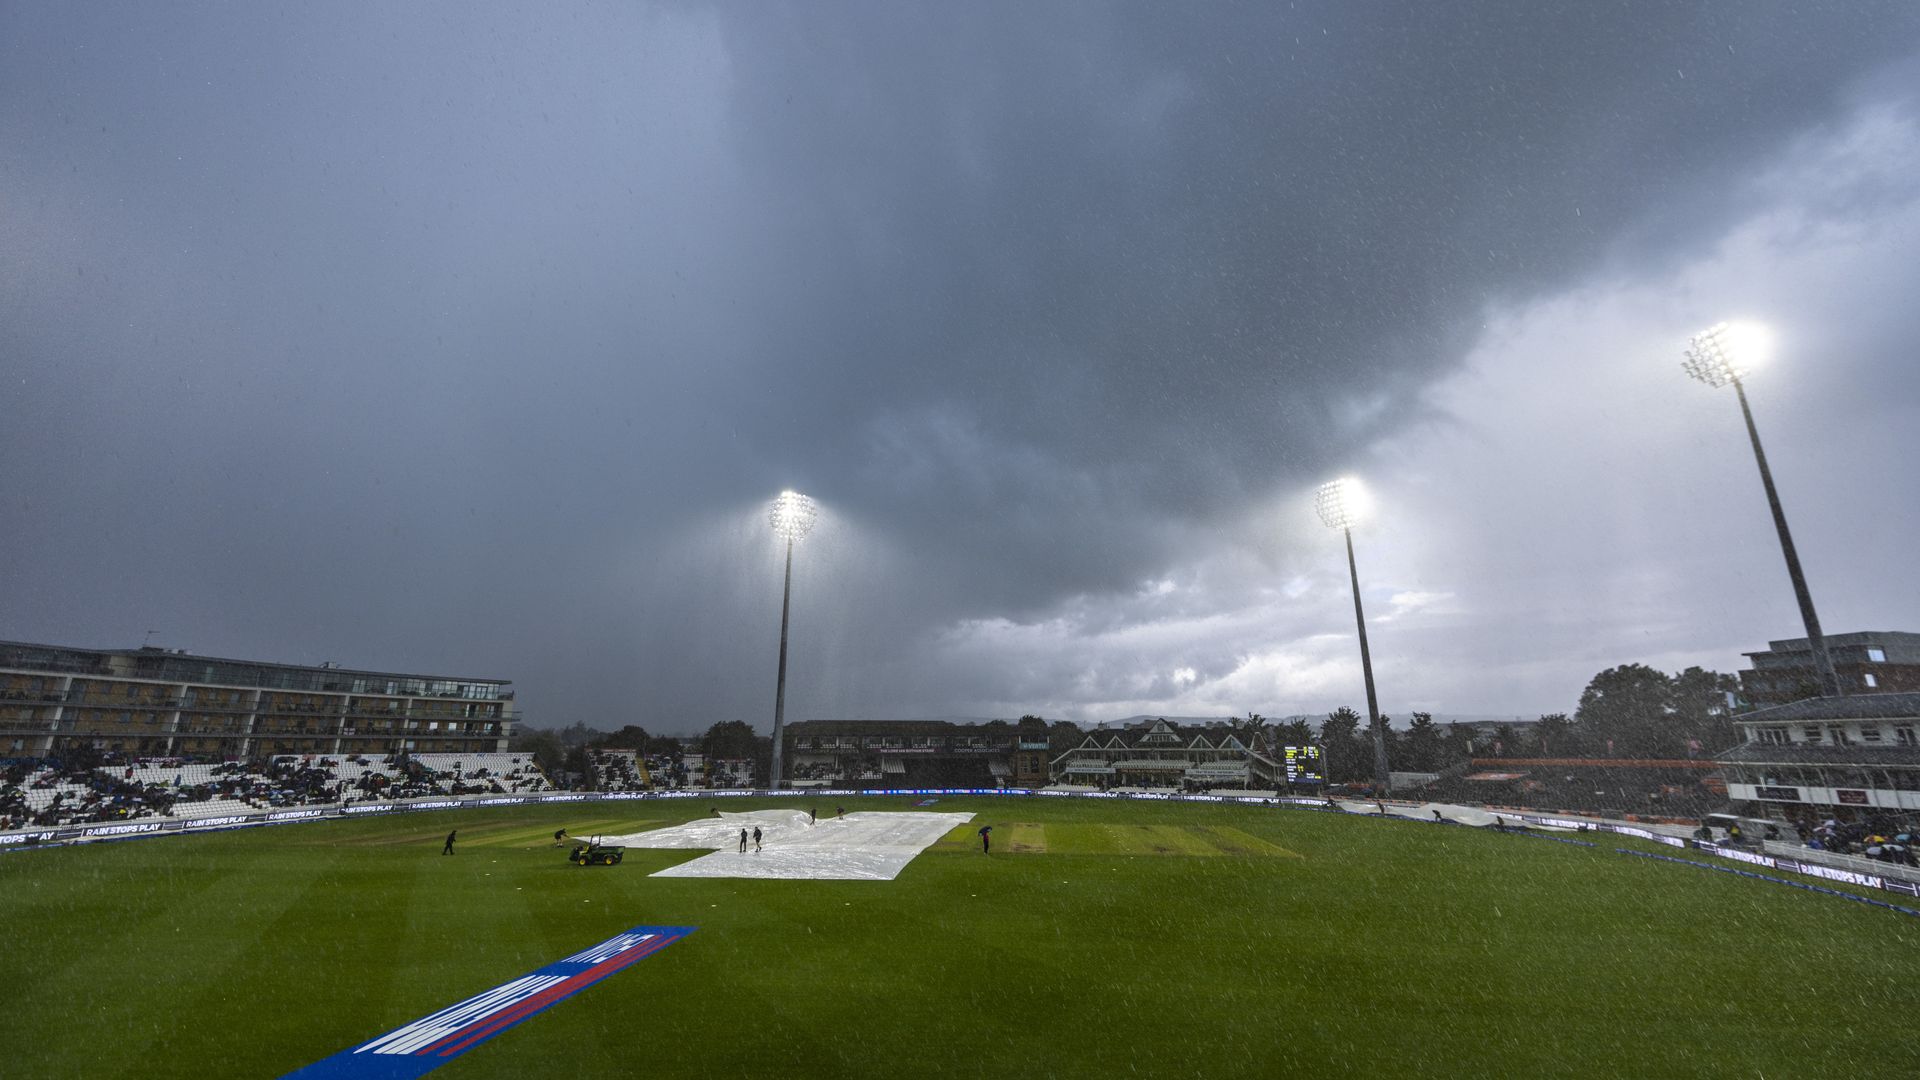 England's second ODI against Pakistan abandoned due to rain